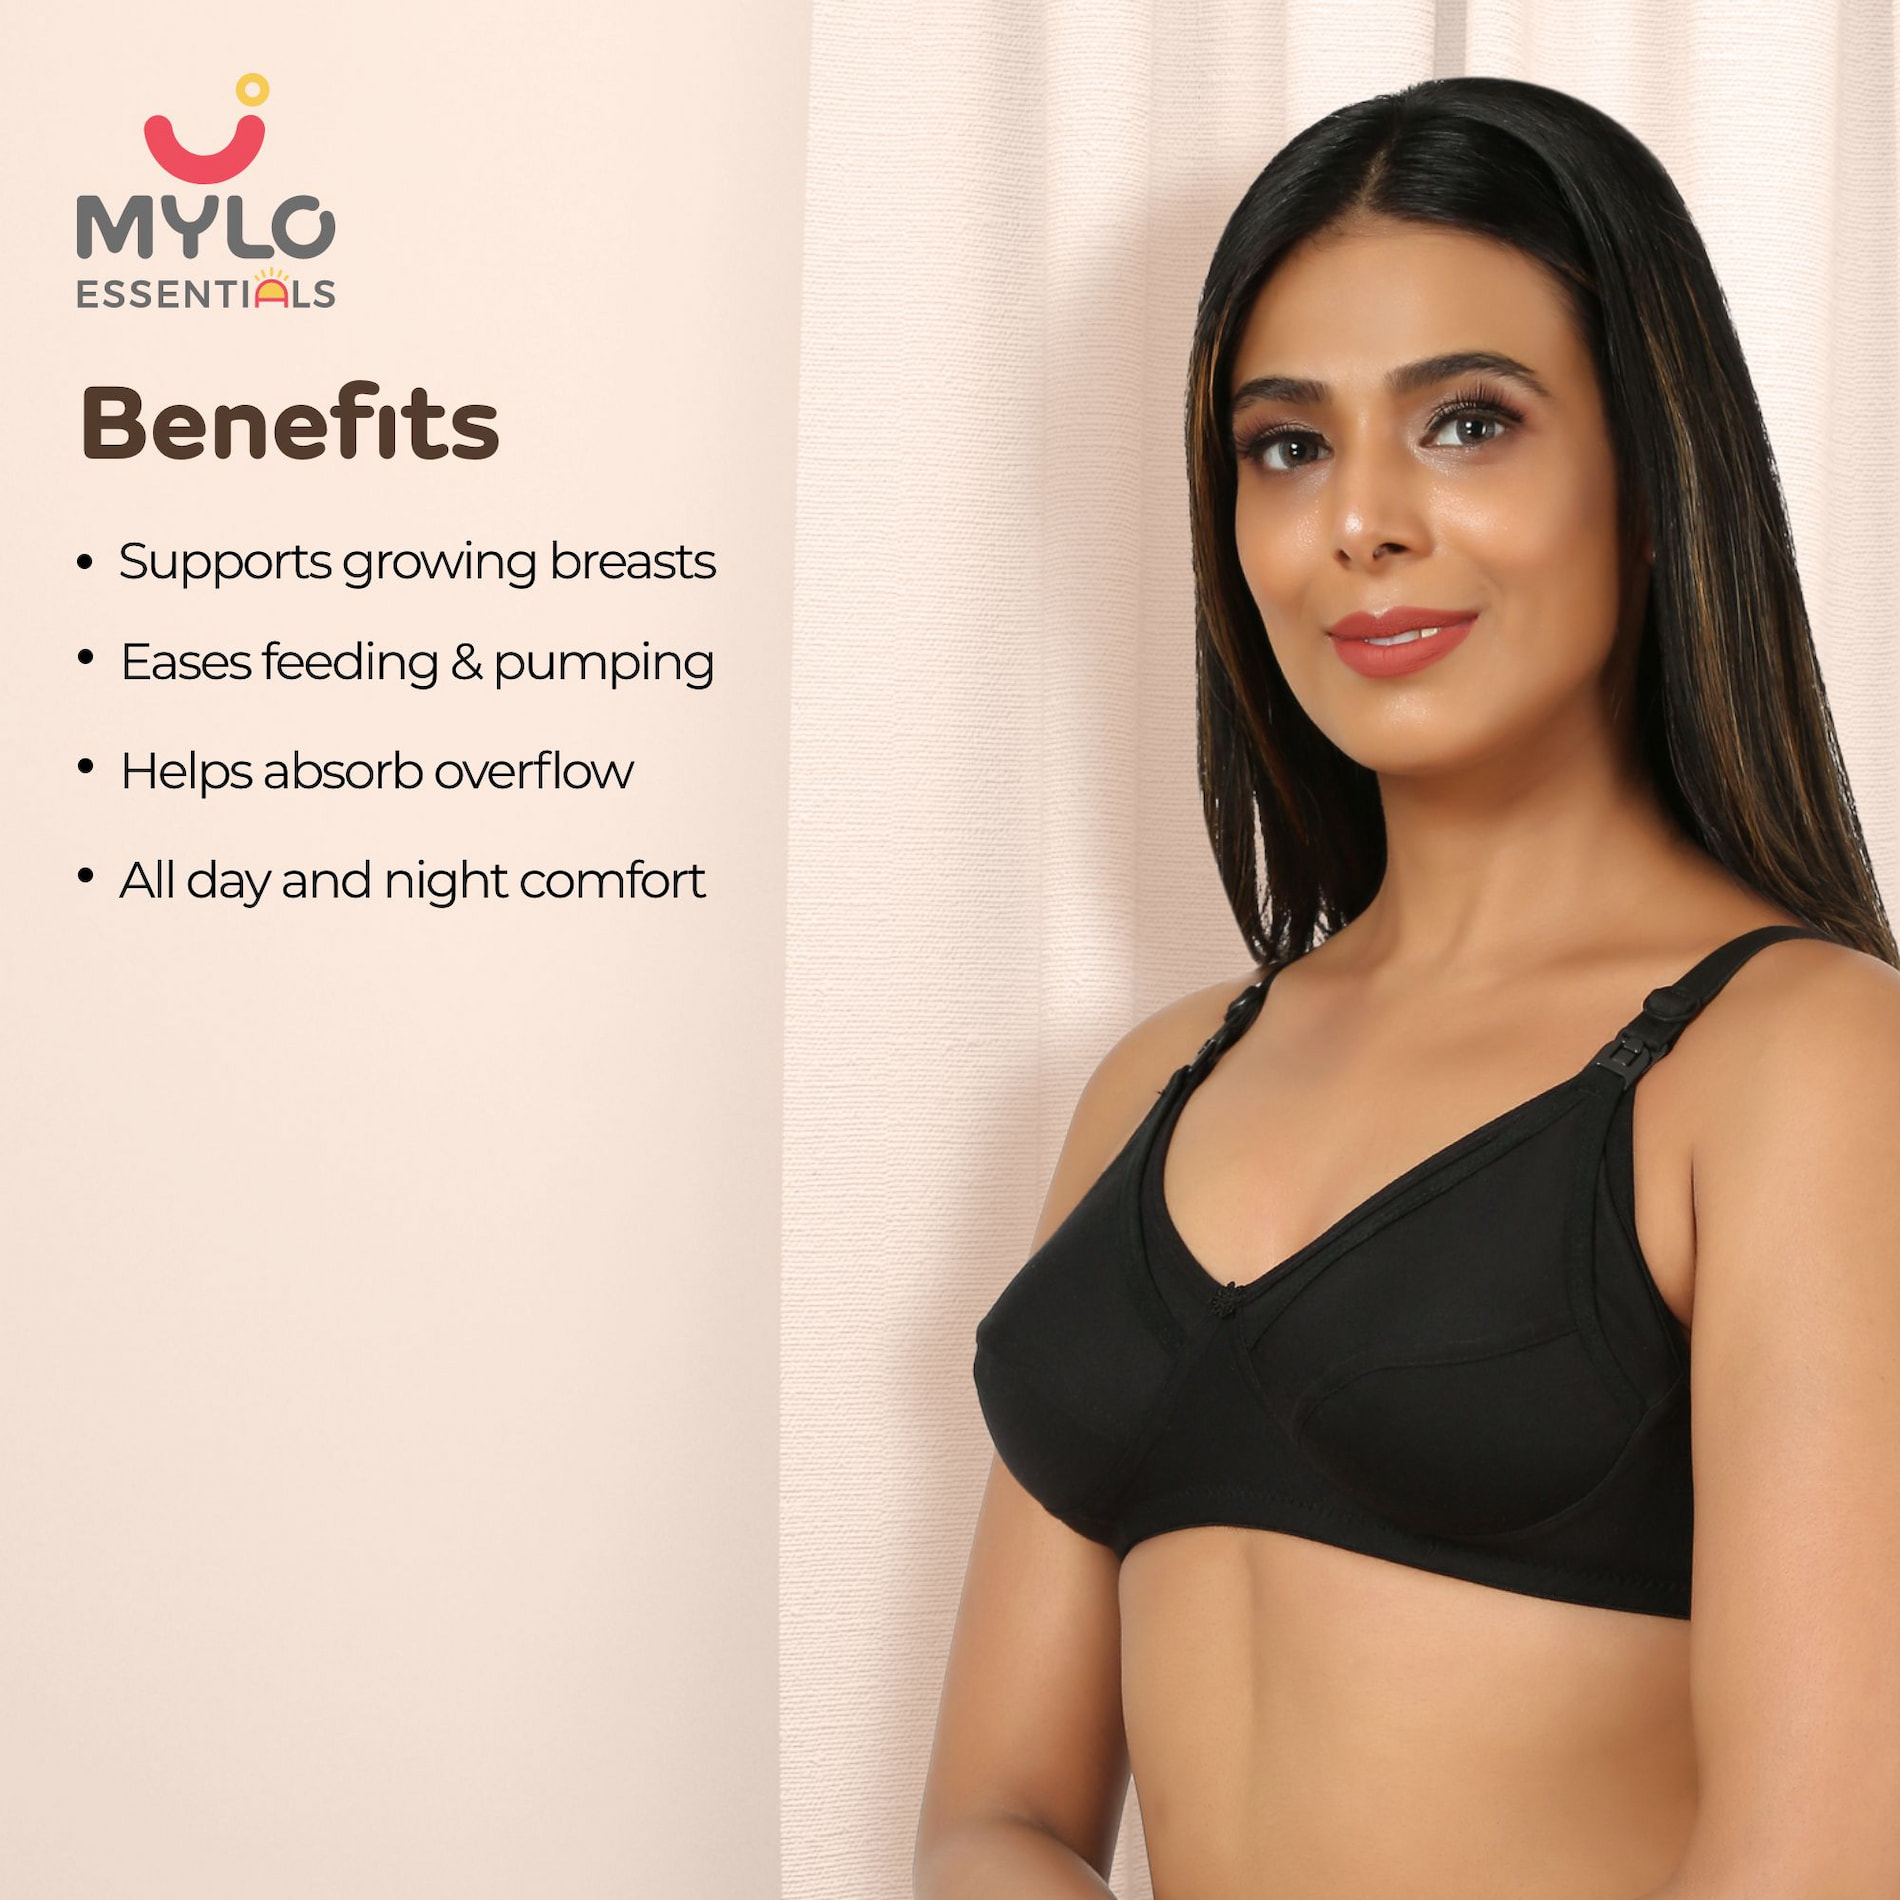 Maternity/Nursing Bras Non-Wired, Non-Padded with free Bra Extender - Classic Black 36 B 